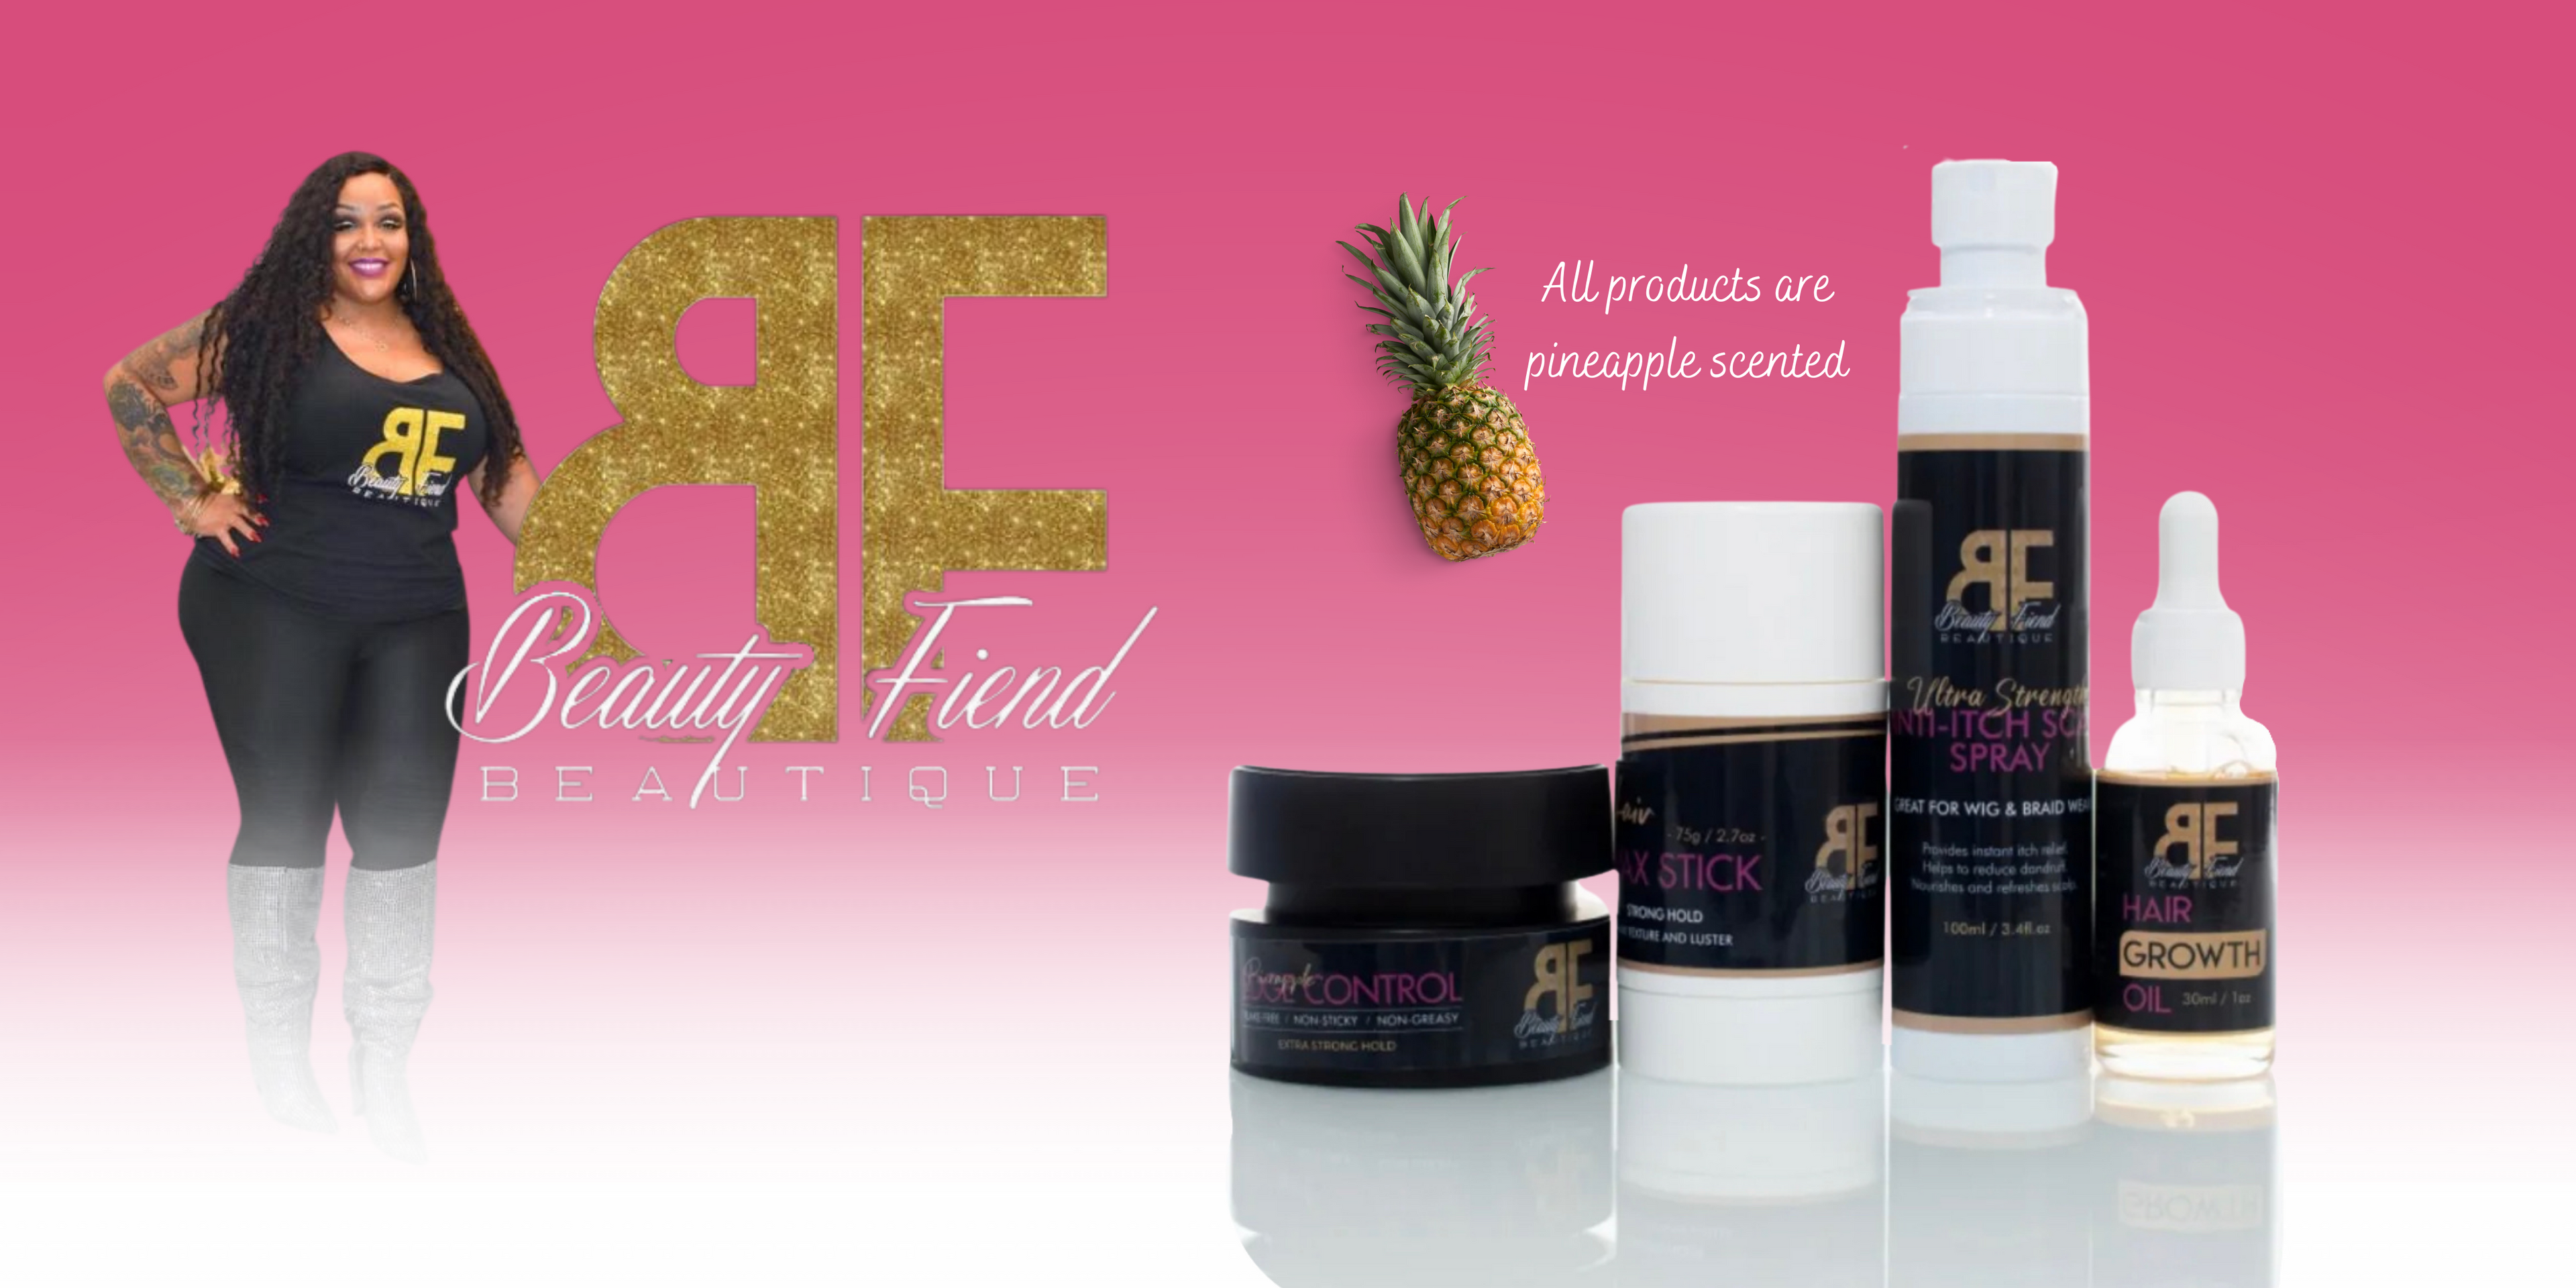 Image of website banner with owner and hair products bundle.